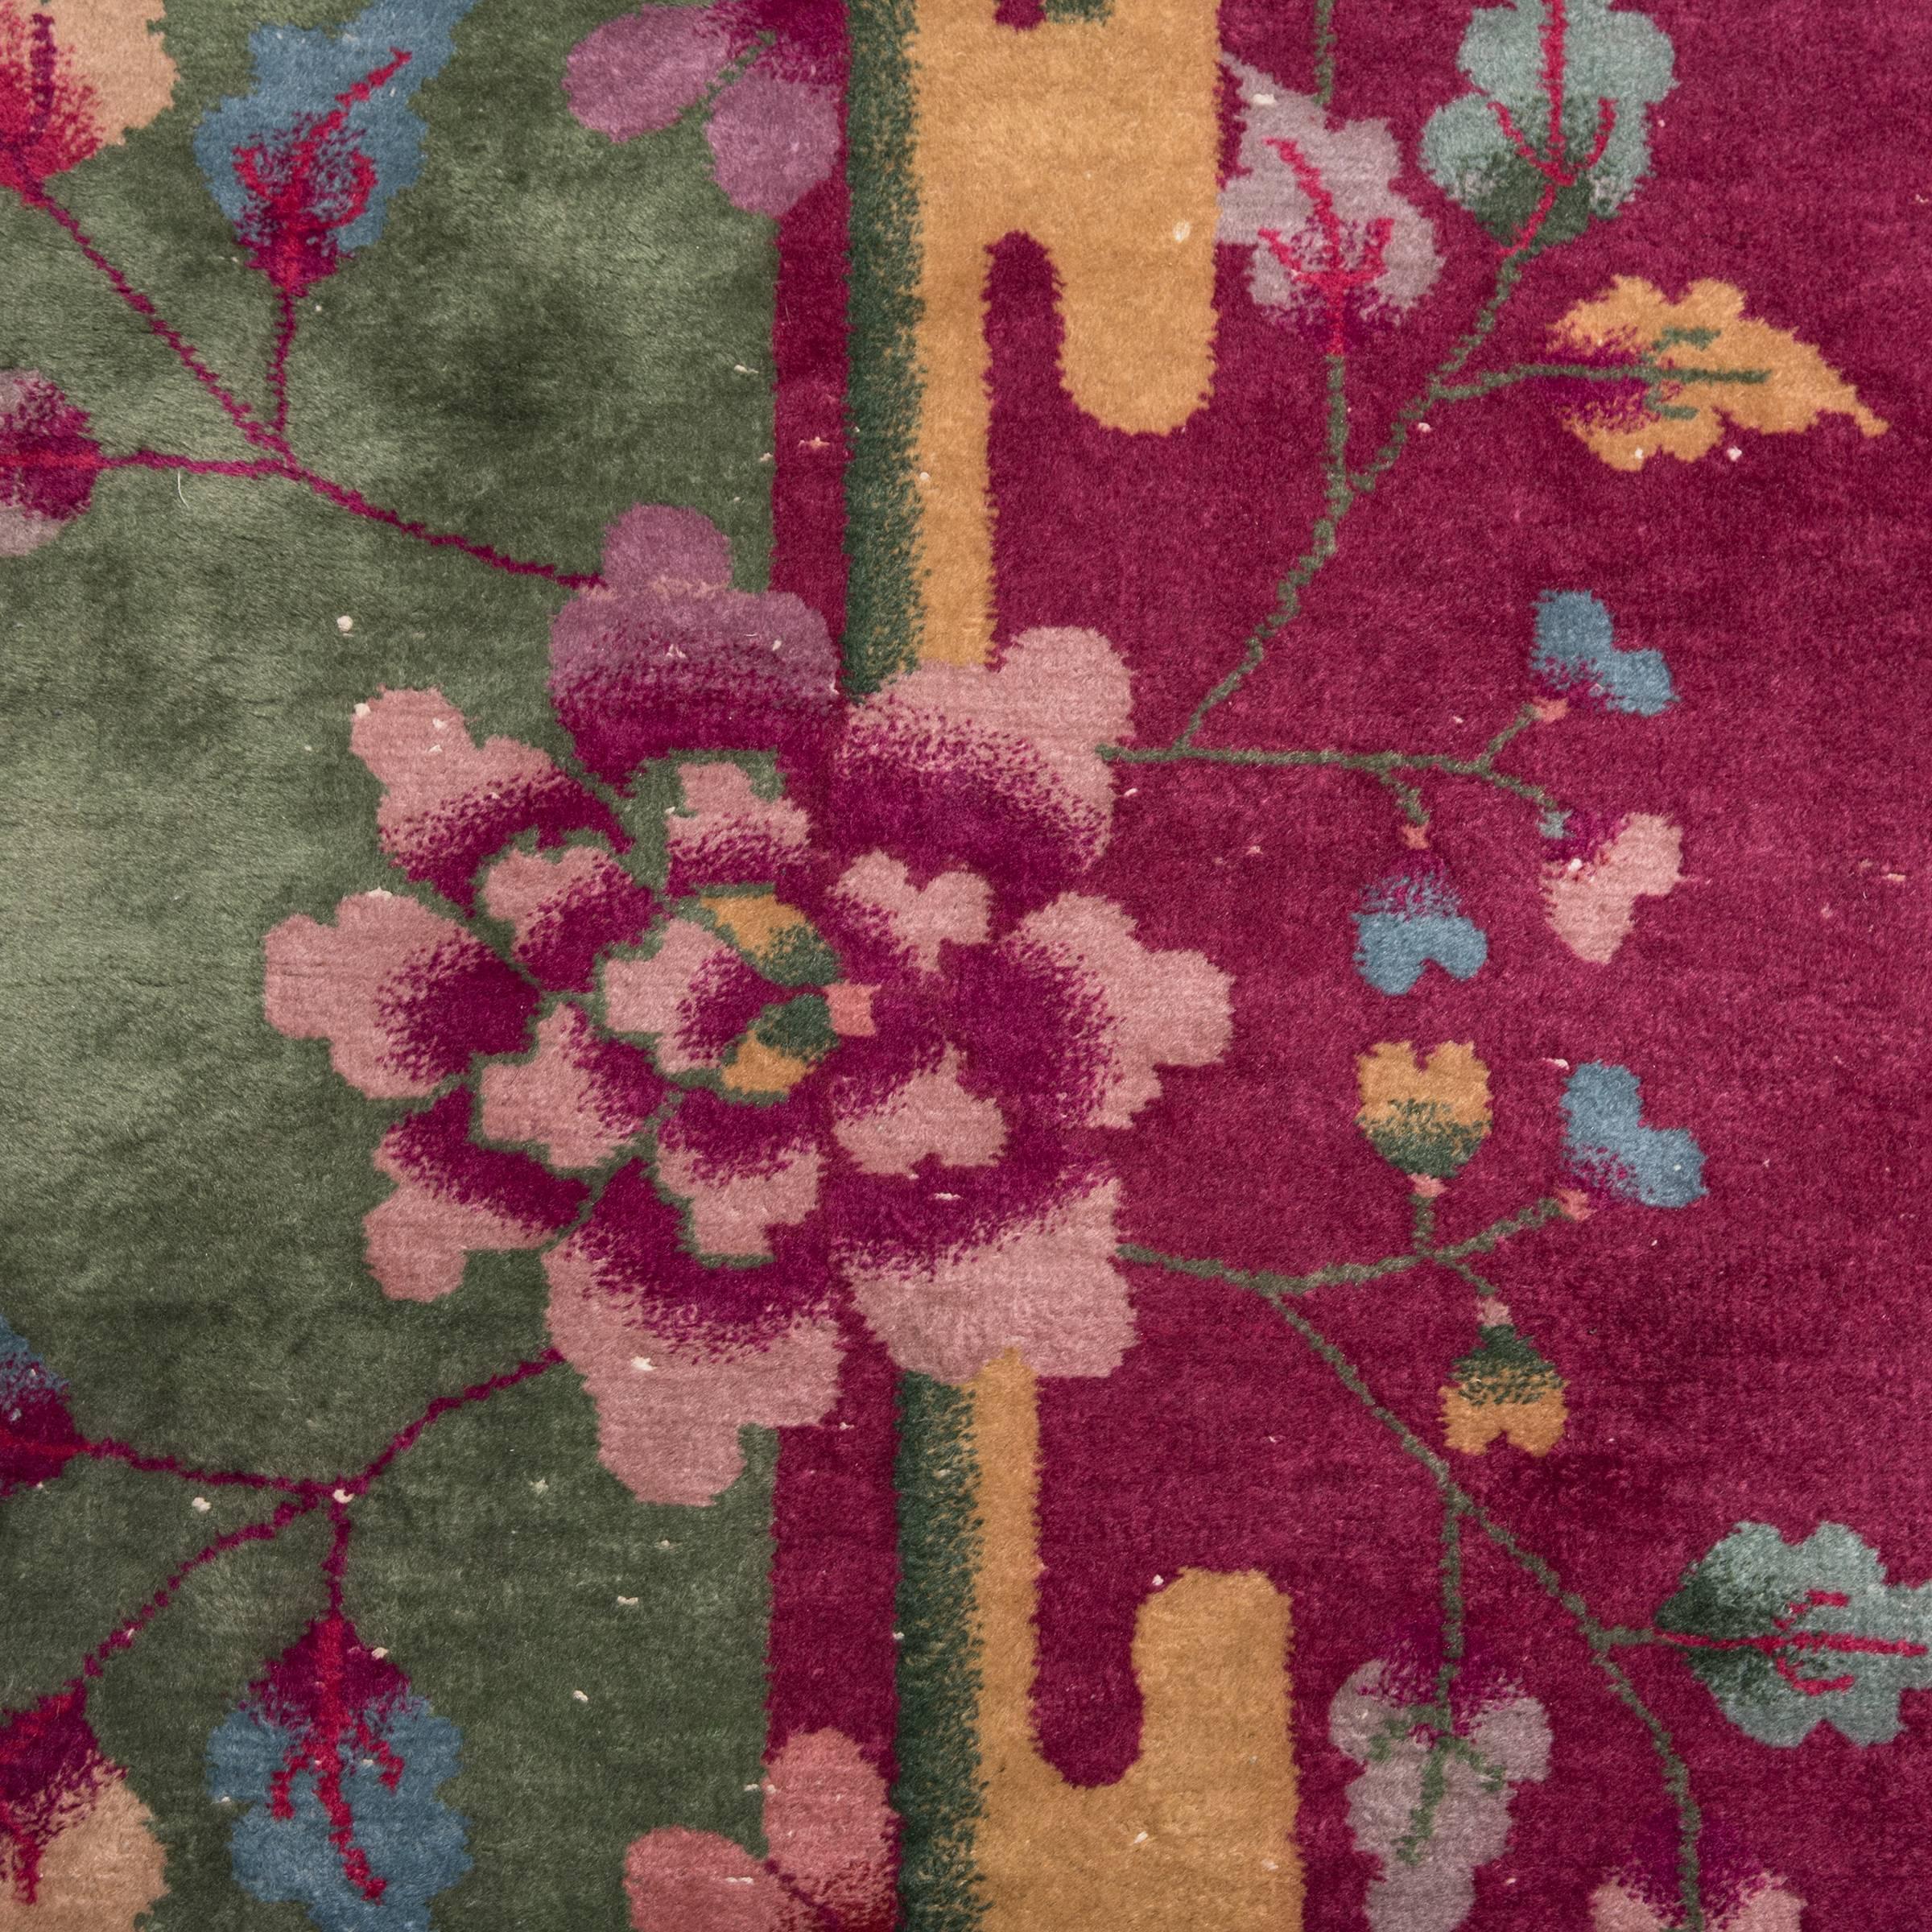 In order to meet an ever-growing demand in Europe and American during the beginning of the 20th-century, foreign manufacturers were lured to China to produce rugs. Among the most famous were Nichols “Super Rugs” made in Tientsin. Made of